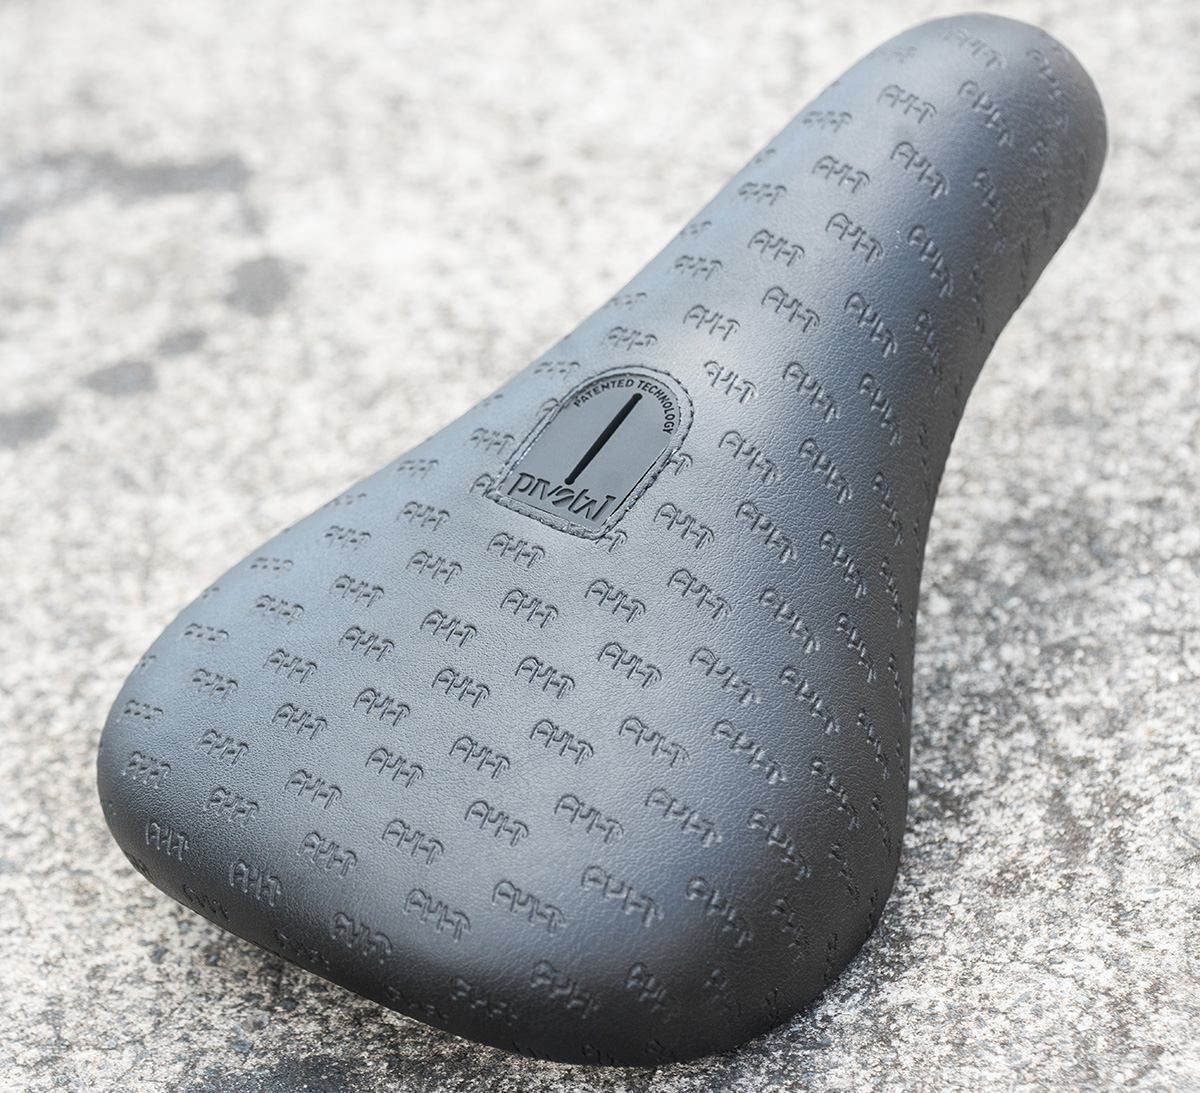 cult-all-over-bmx-seat